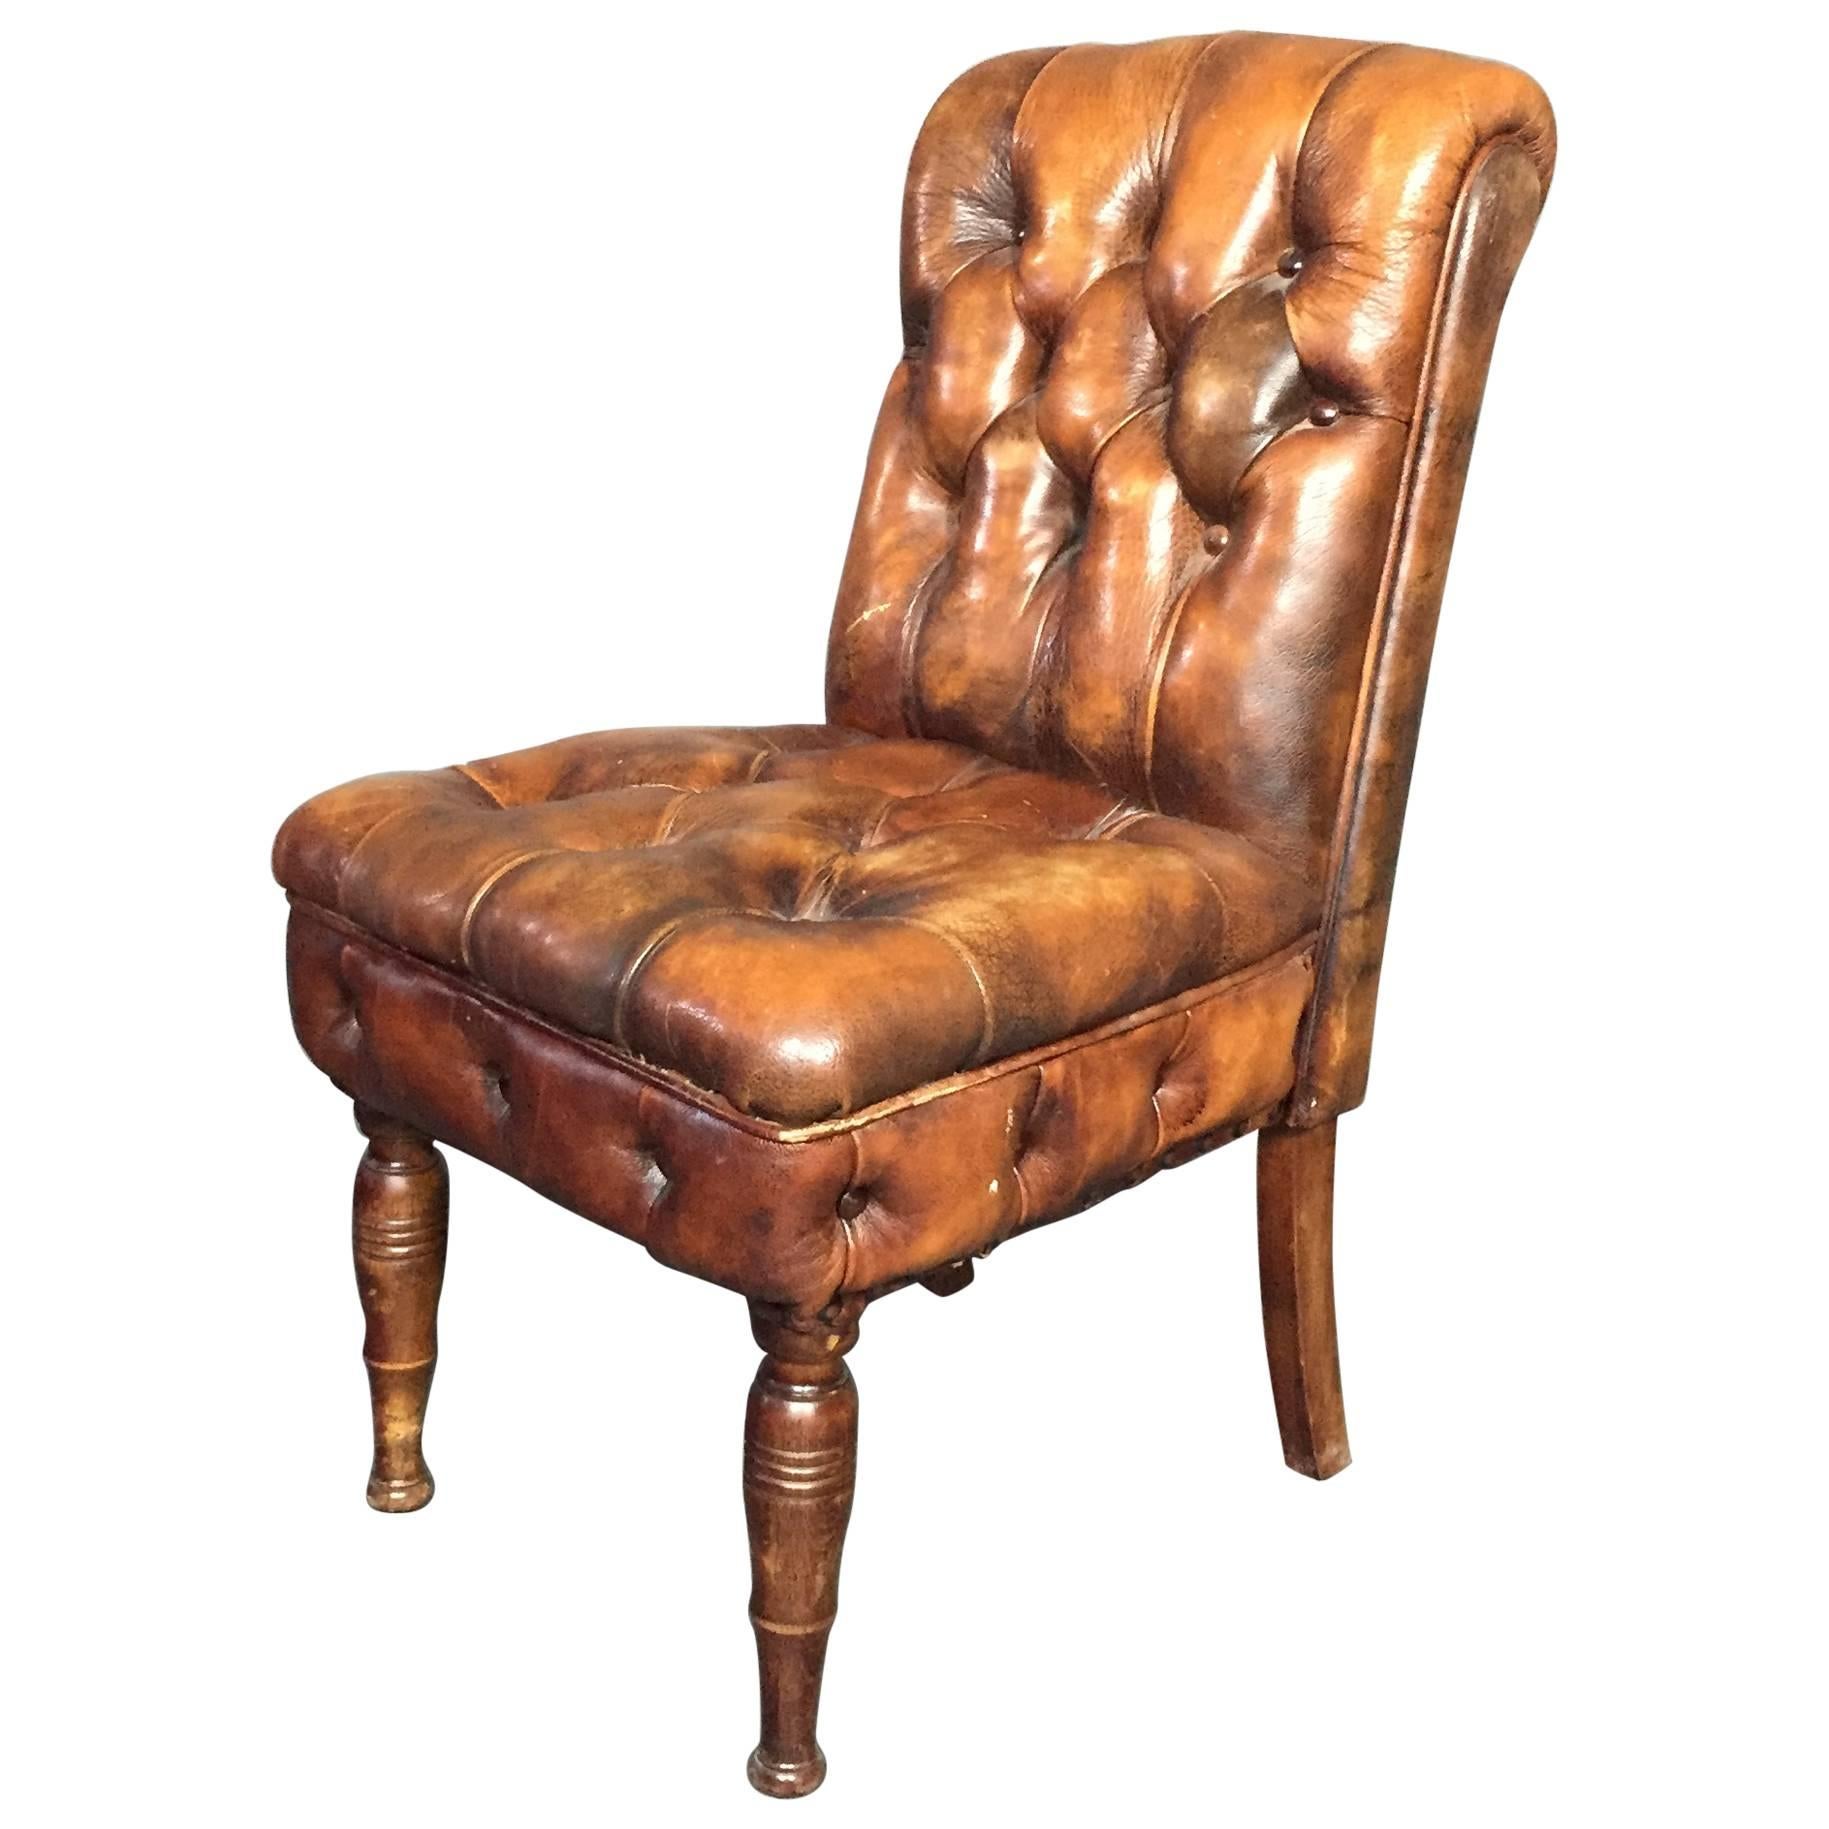 English Chesterfield Slipper Chair, 1920s, Updated Leather